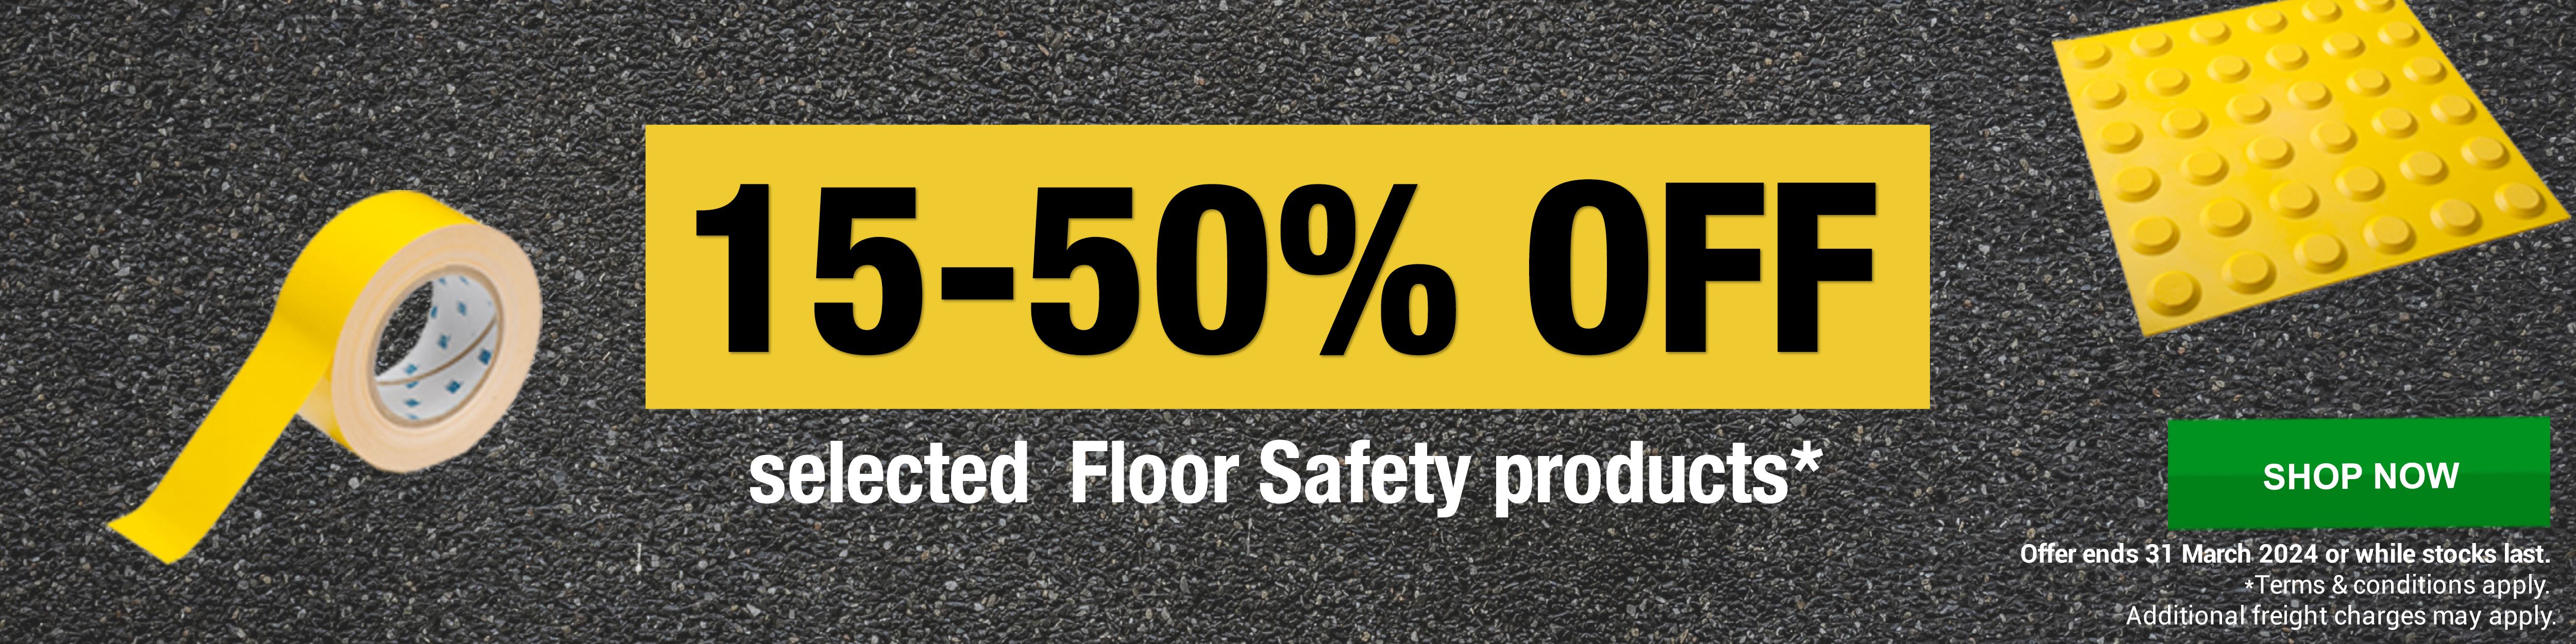 15-50% Off Selected Floor Safety Products* Offer ends 31 March 2024 or while stocks last. Terms, conditions and exclusions apply.